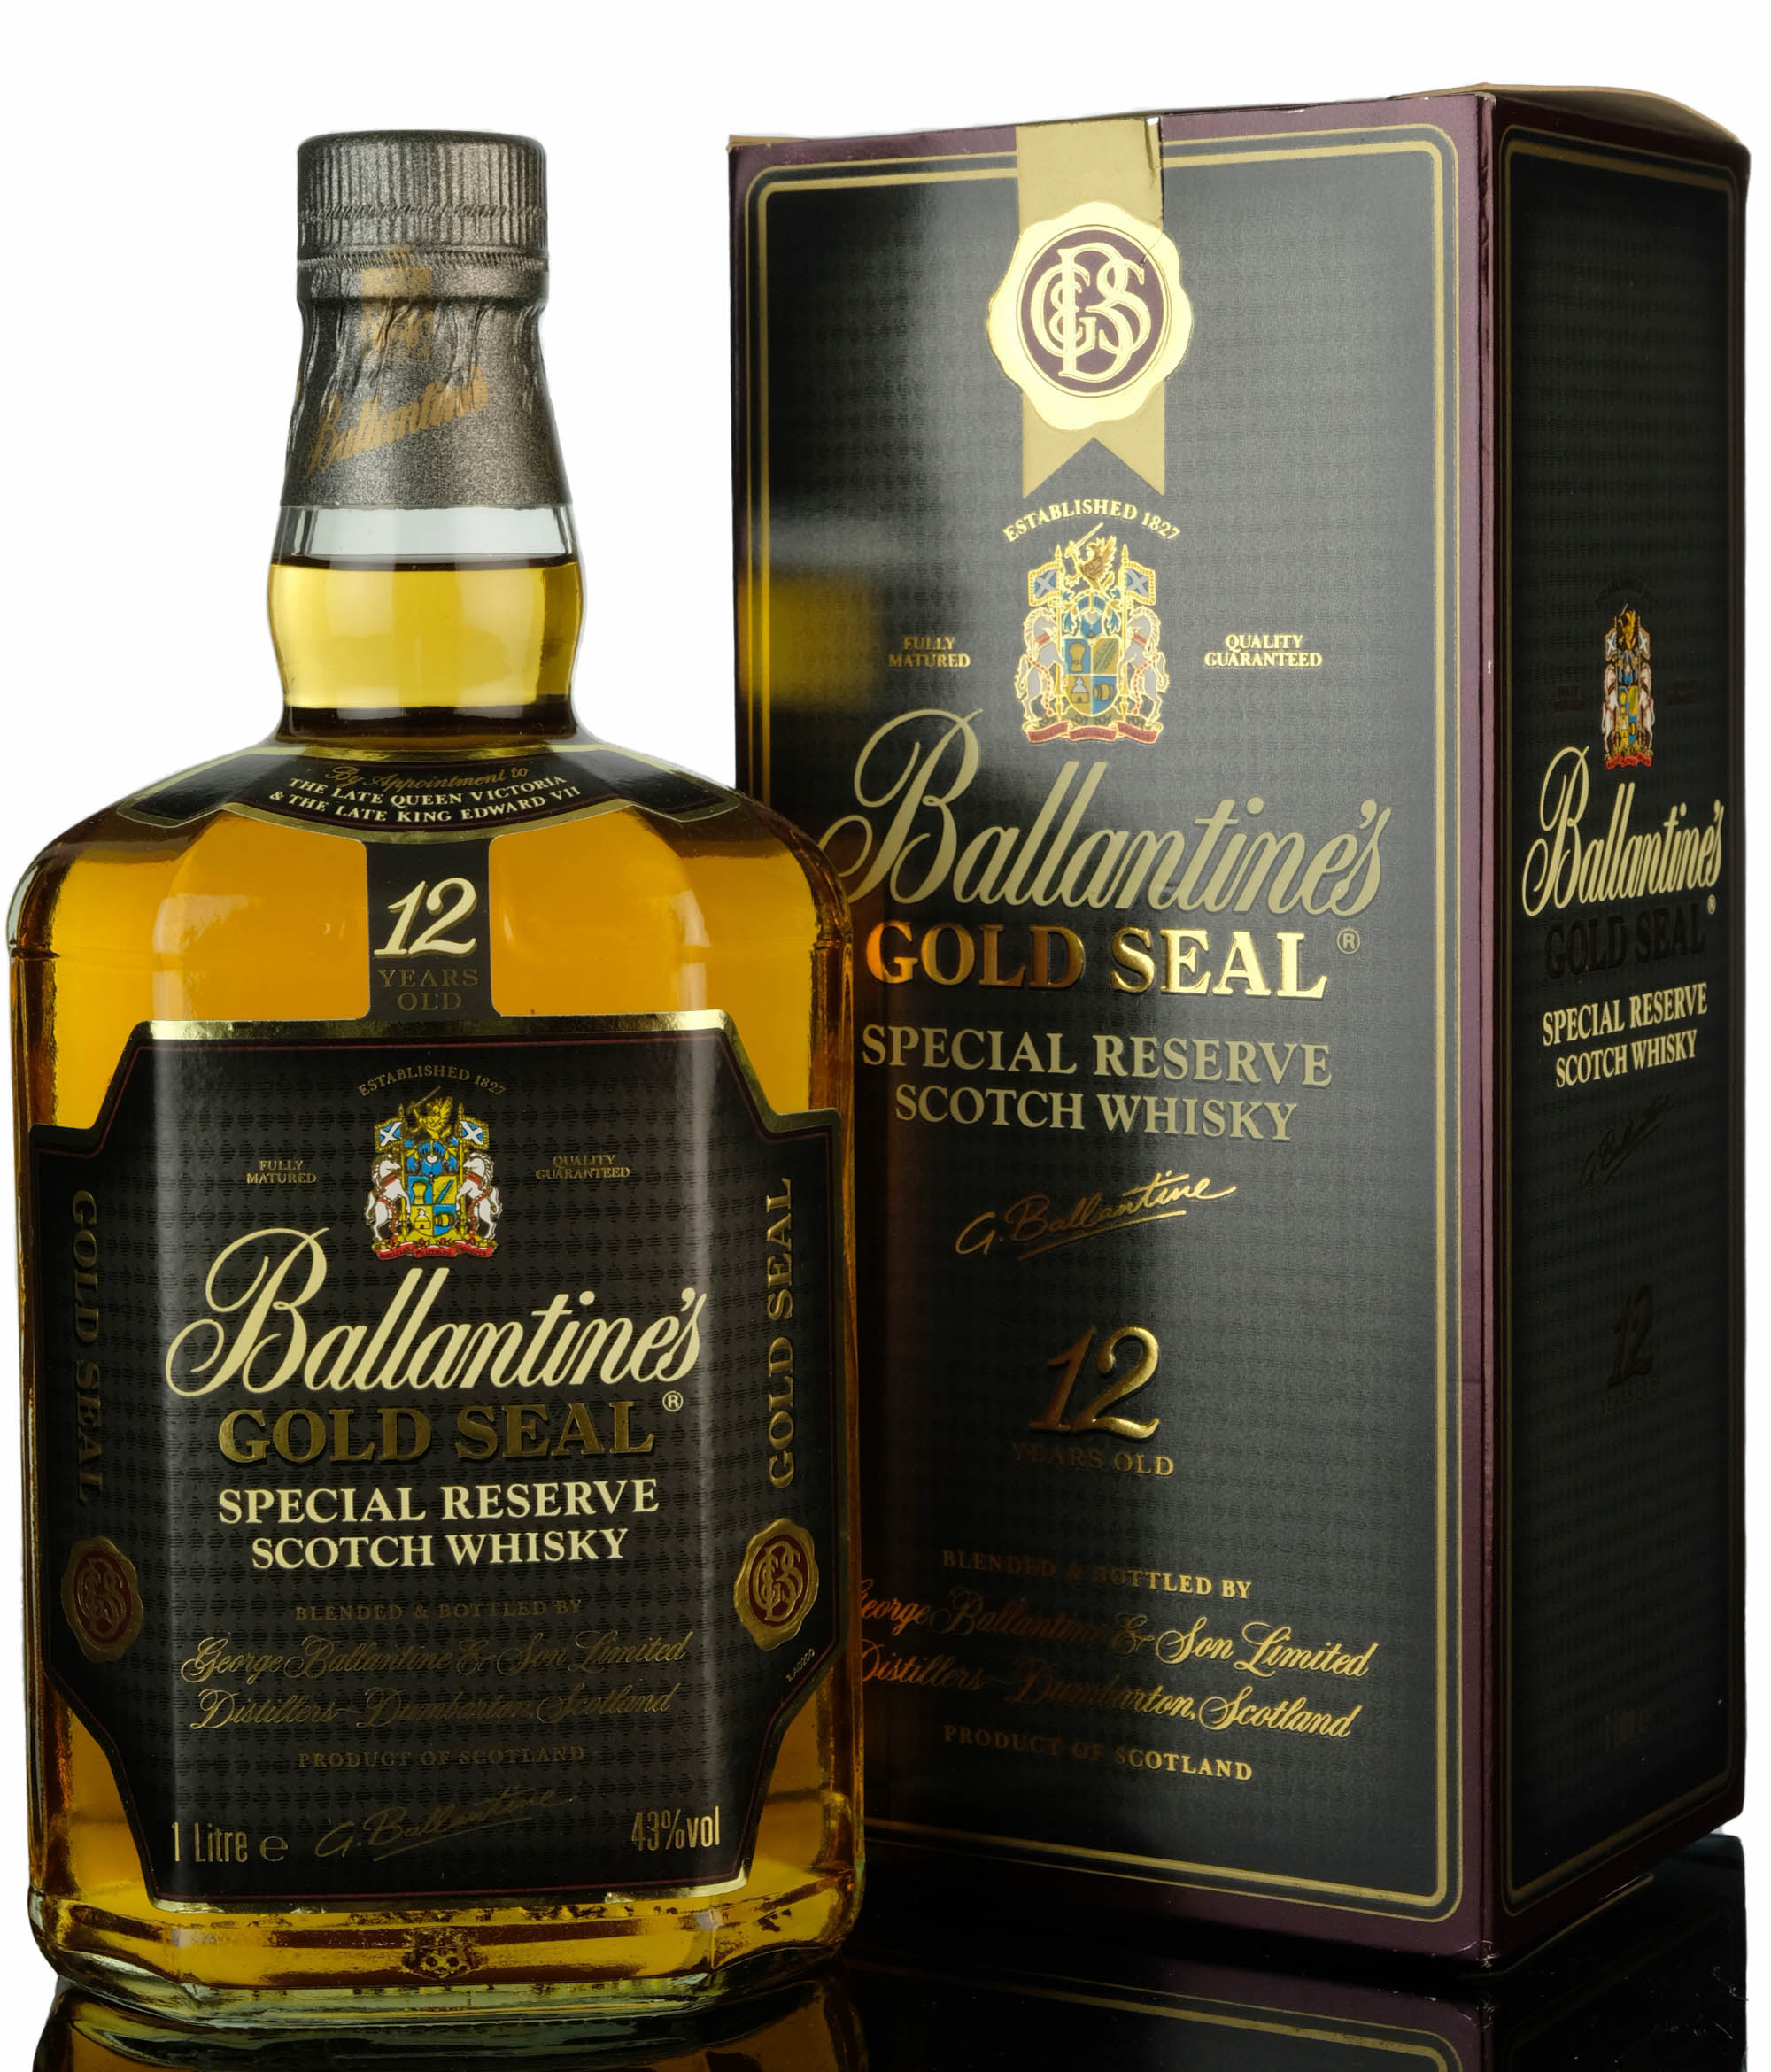 Ballantines 12 Year Old - Gold Seal - 1 Litre